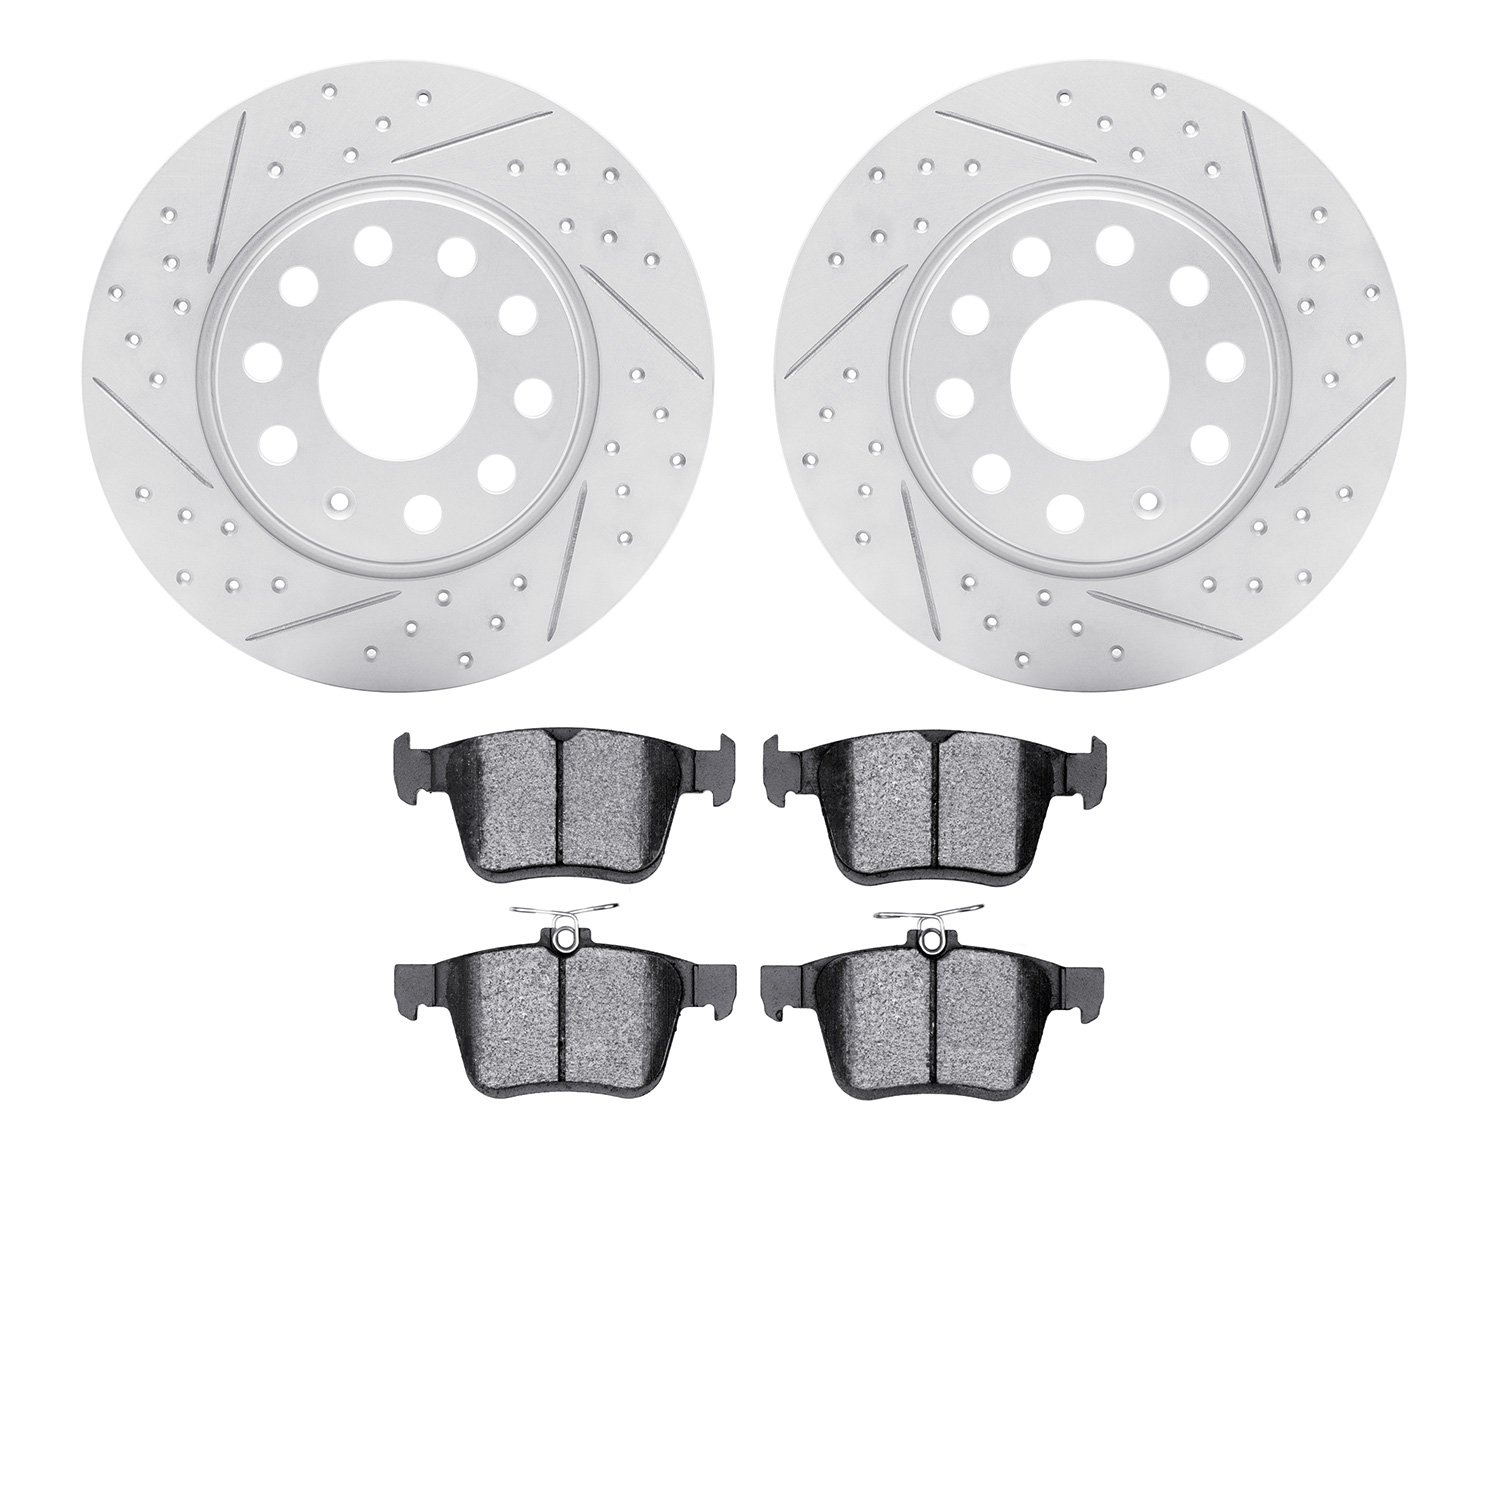 2502-74047 Geoperformance Drilled/Slotted Rotors w/5000 Advanced Brake Pads Kit, 2017-2019 Audi/Volkswagen, Position: Rear